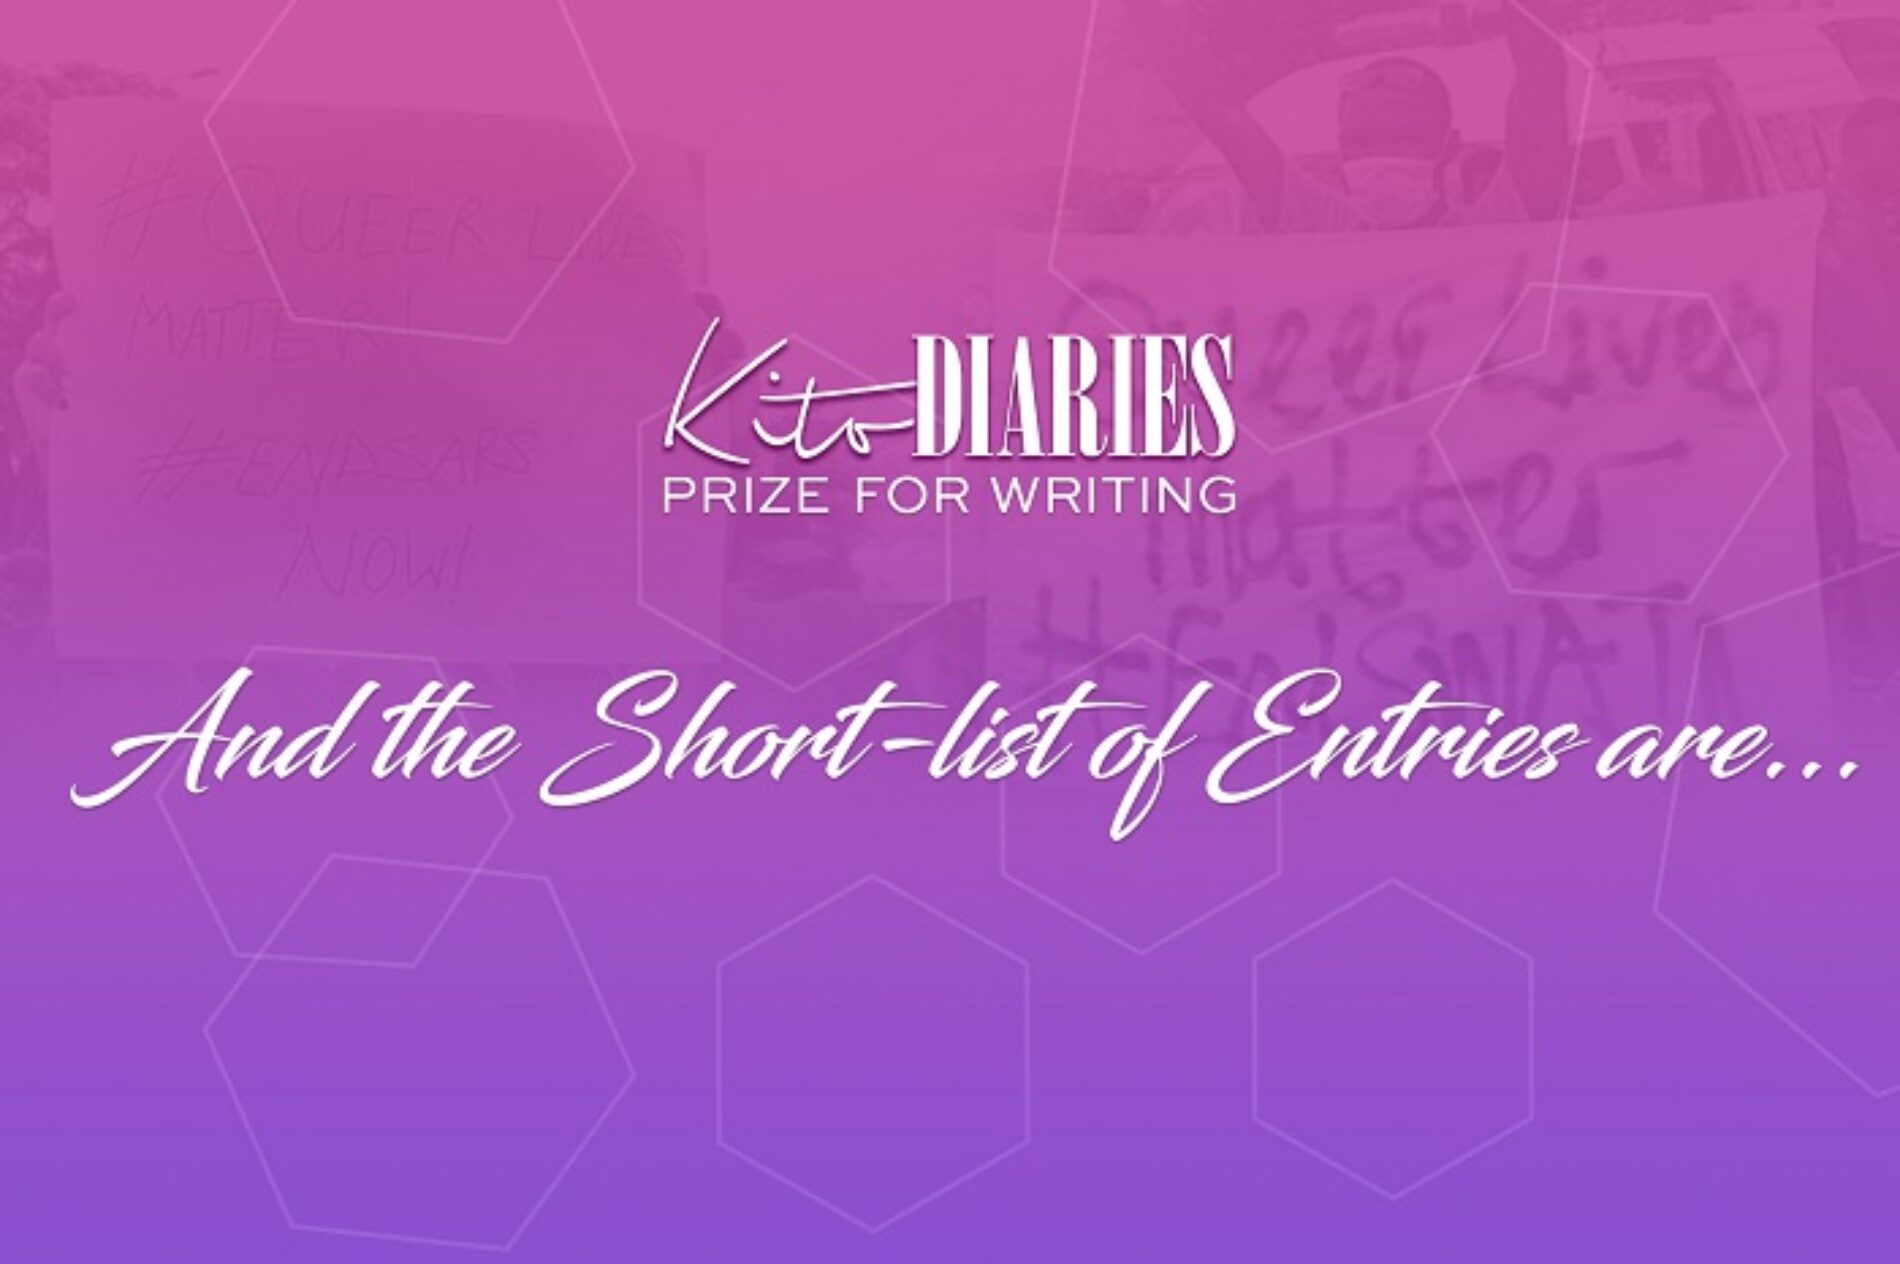 KITO DIARIES PRIZE FOR WRITING: AND THE SHORTLIST OF ENTRIES ARE…